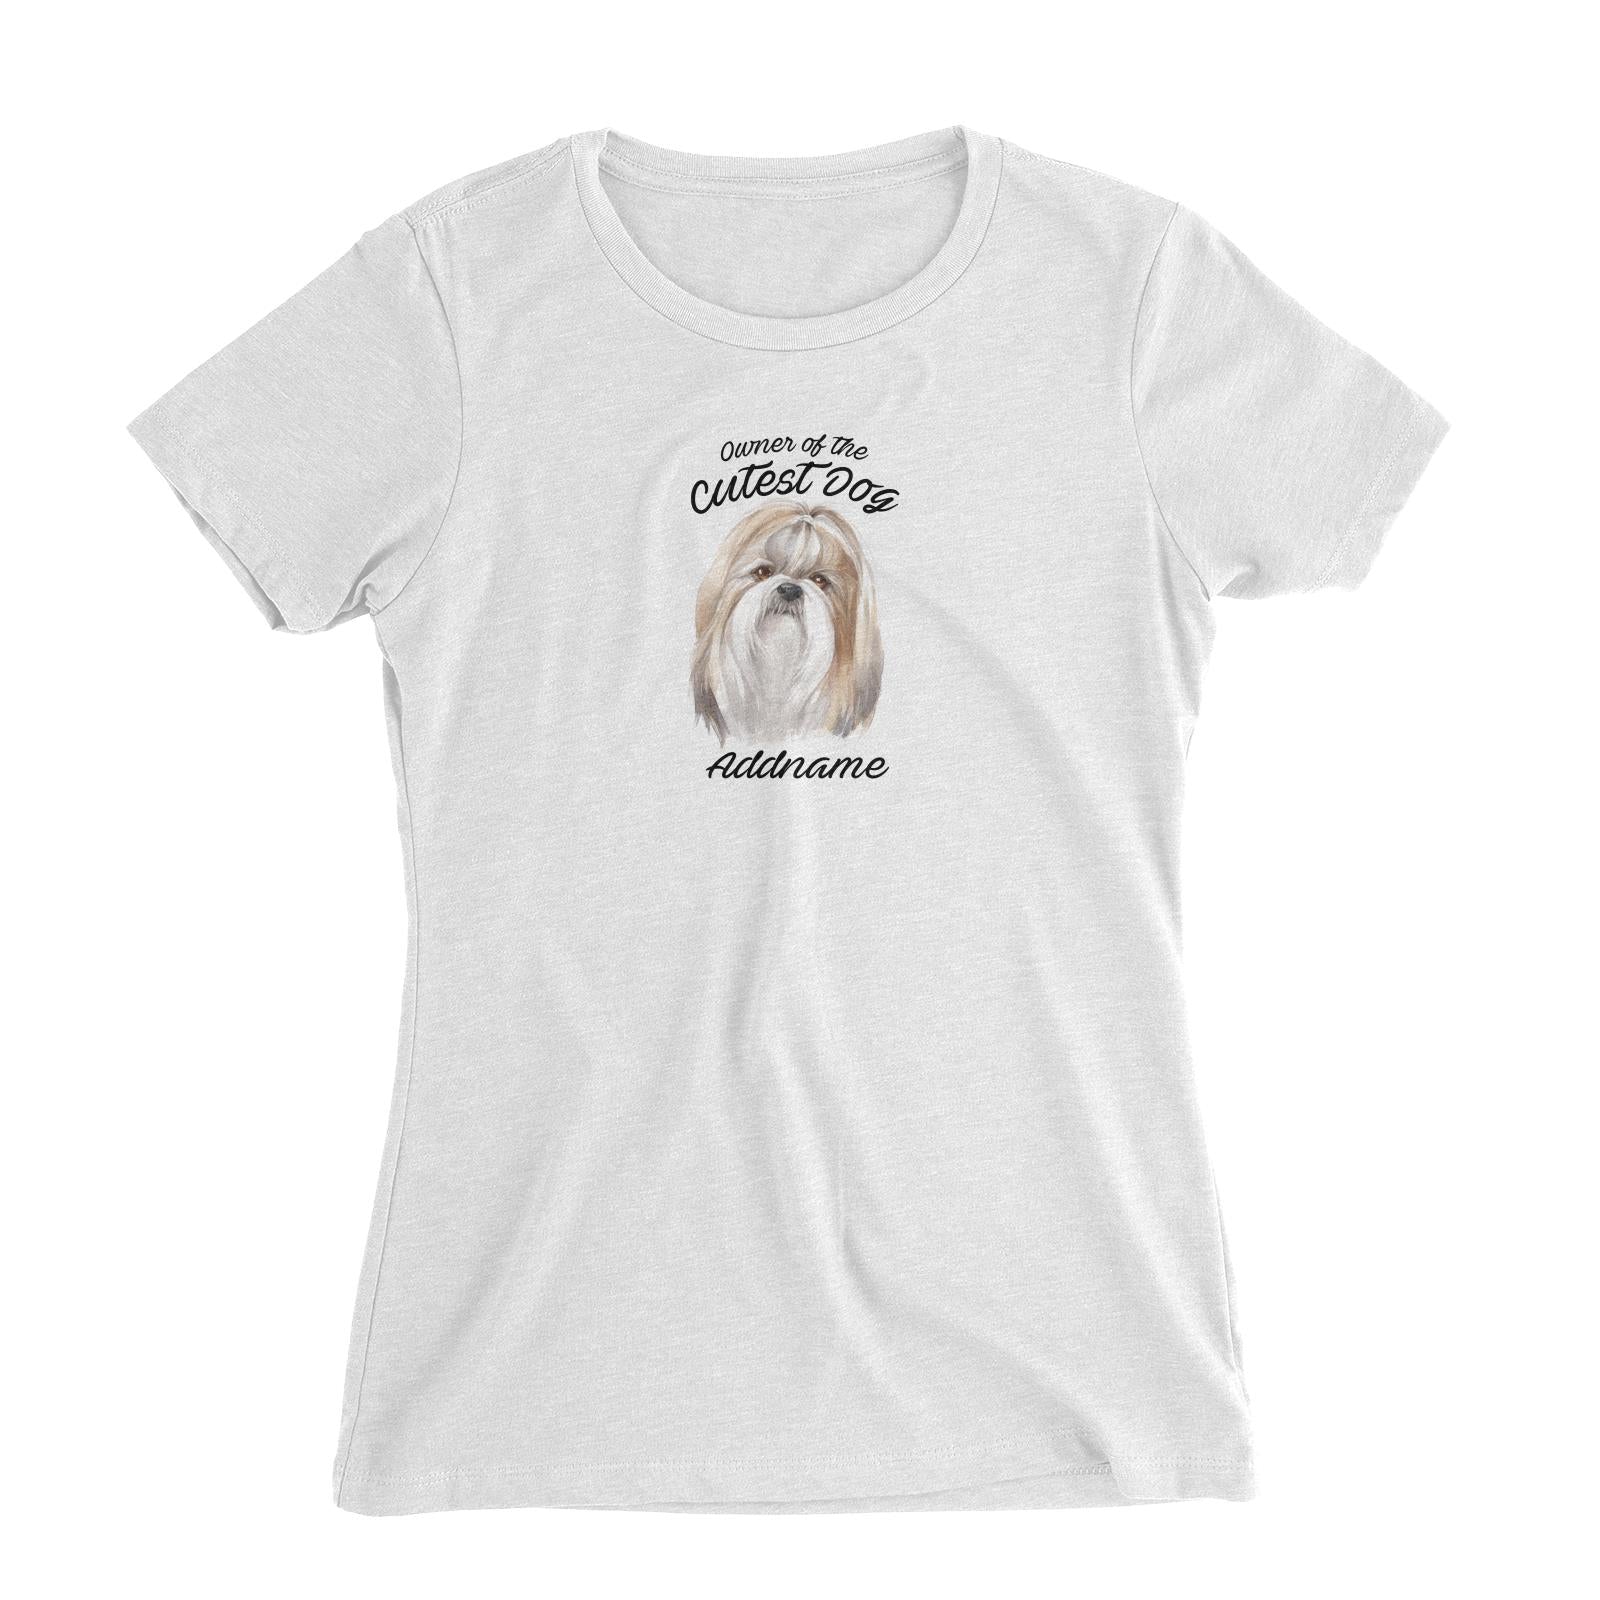 Watercolor Dog Owner Of The Cutest Dog Shih Tzu Addname Women's Slim Fit T-Shirt